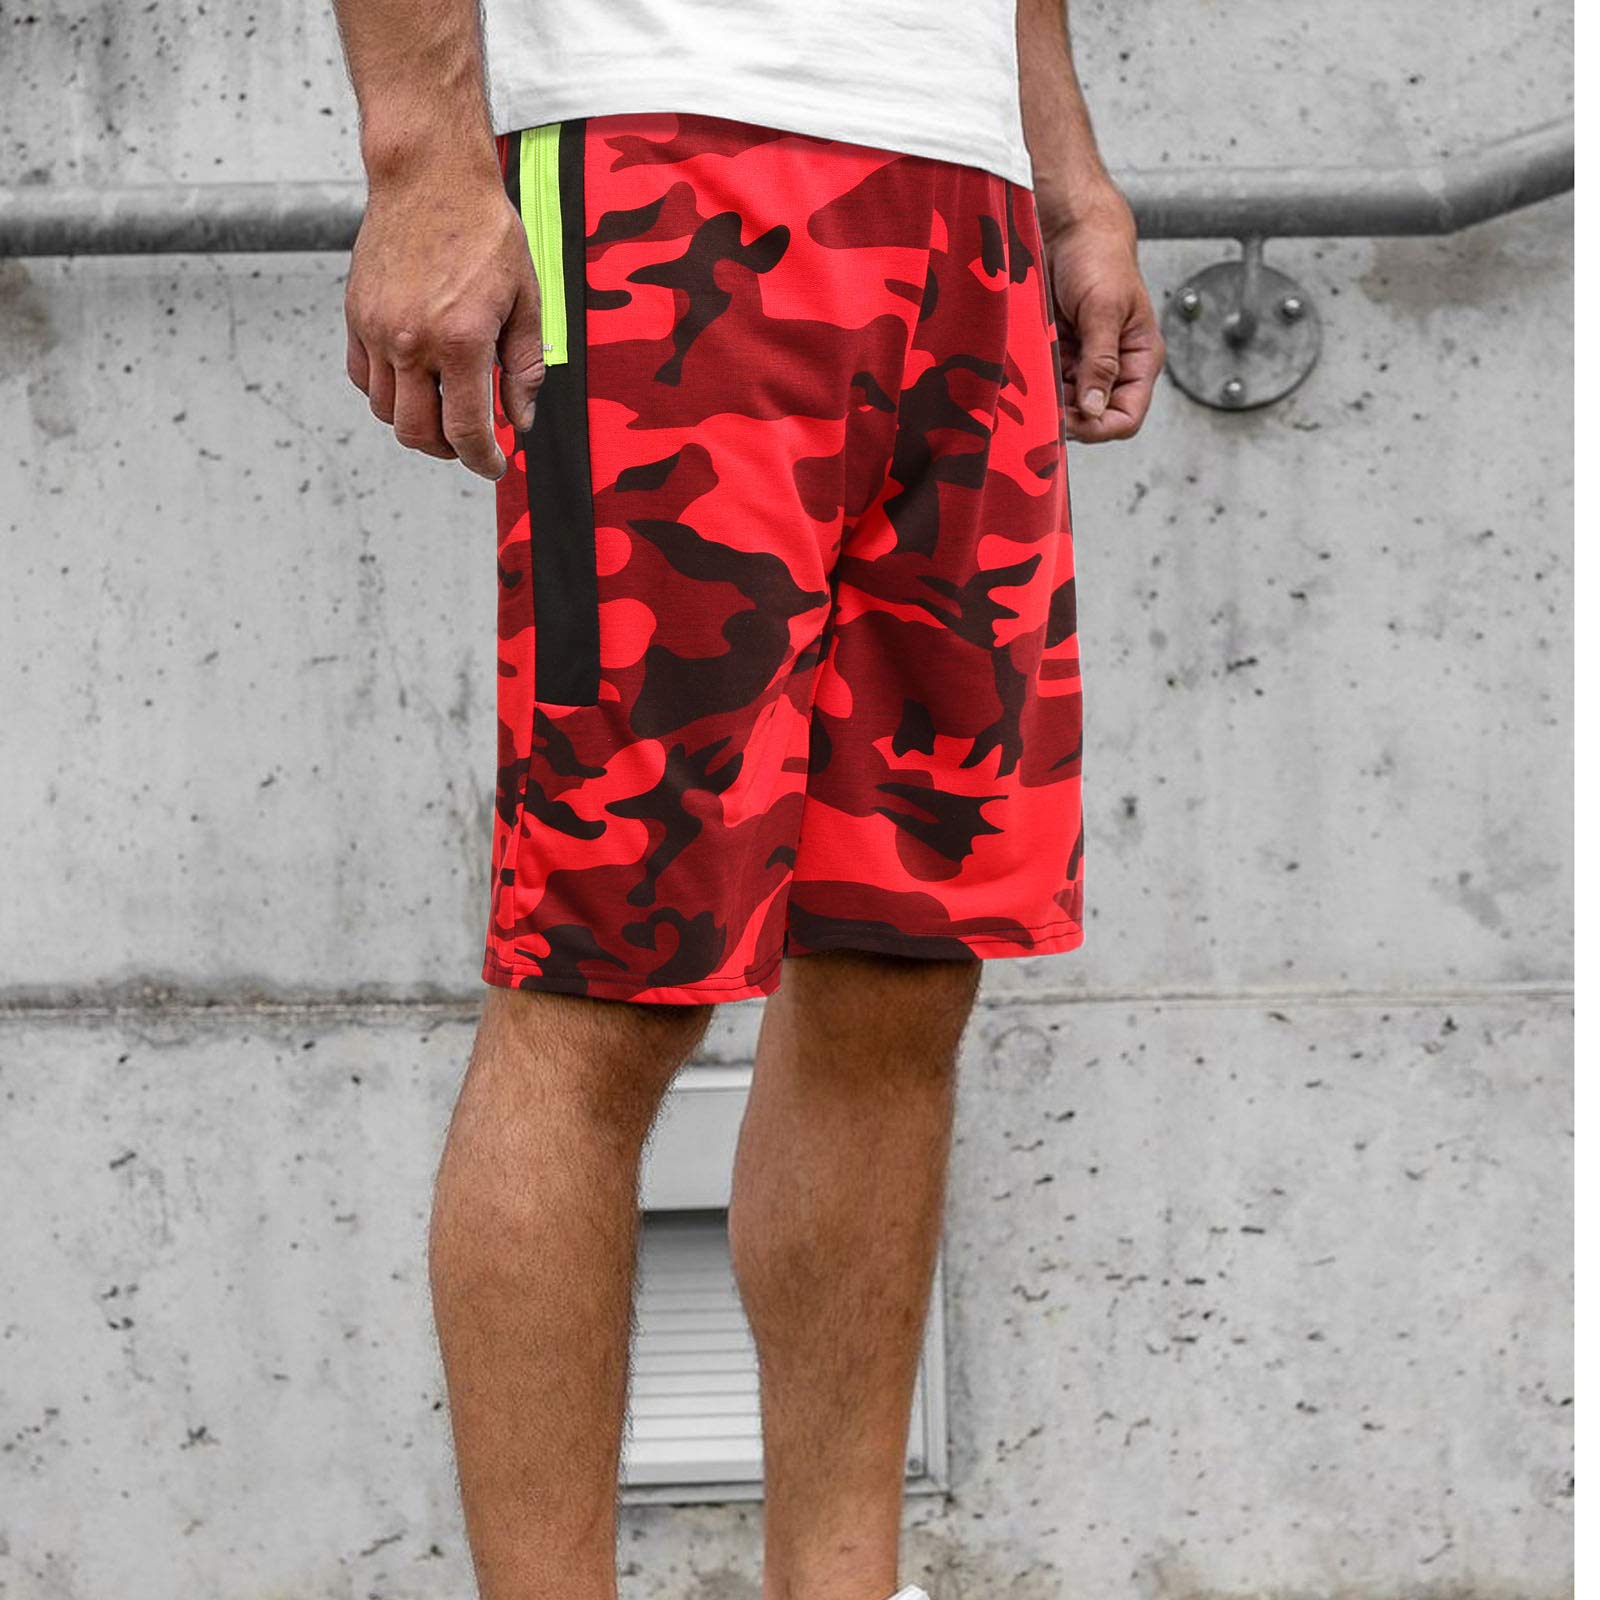 Men's Cargo Short Summer Casual Fitness Bodybuilding Camouflage Print Workout Shorts(Red, XXL)